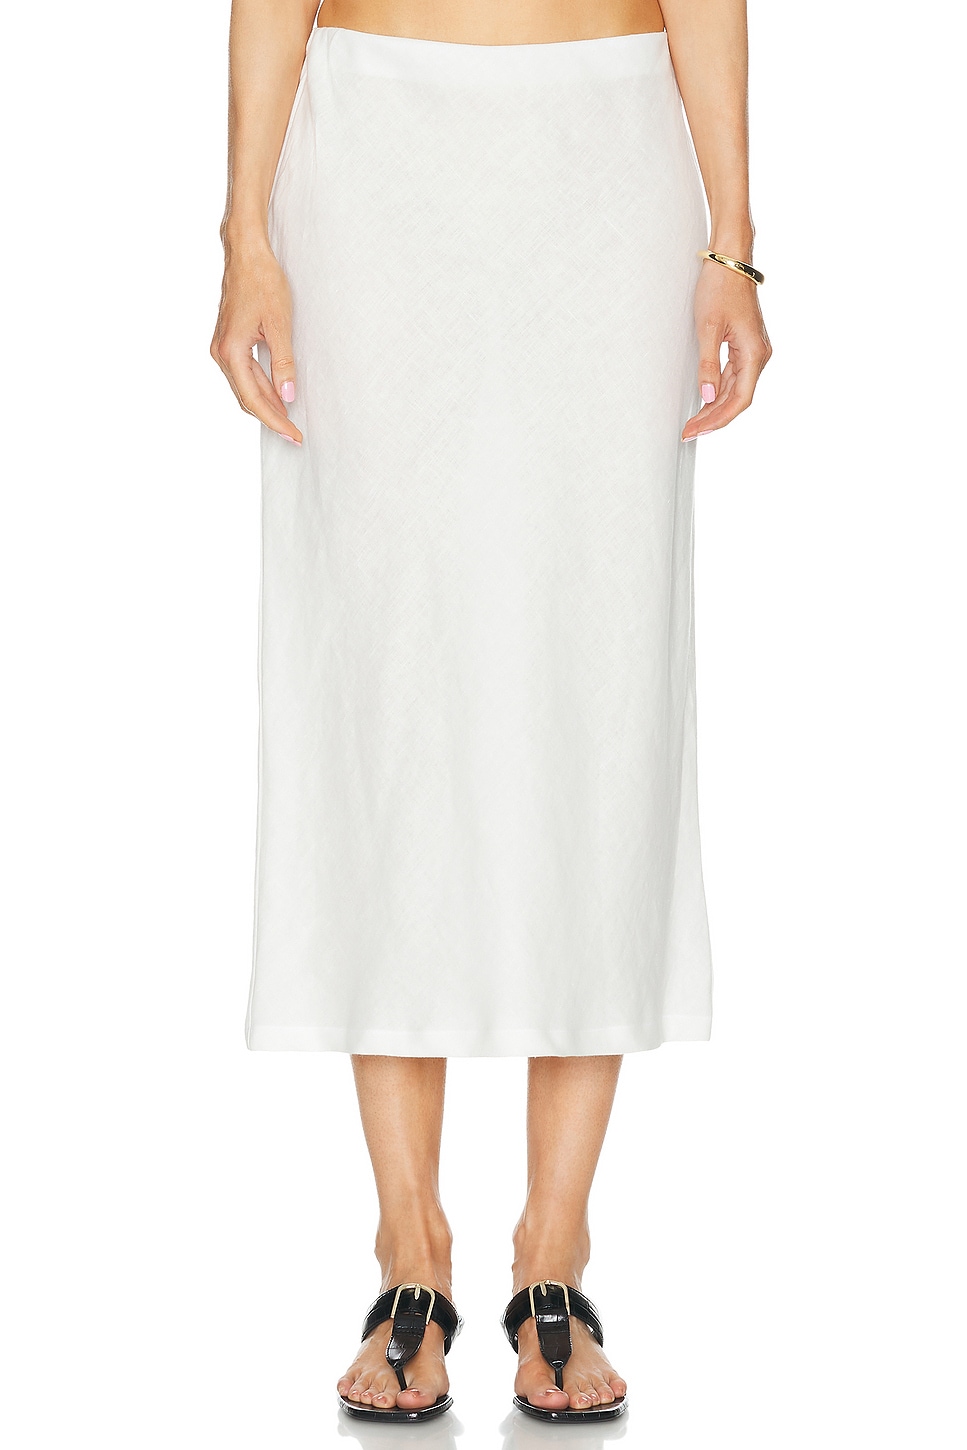 Image 1 of Enza Costa Linen Bias Skirt in Undyed